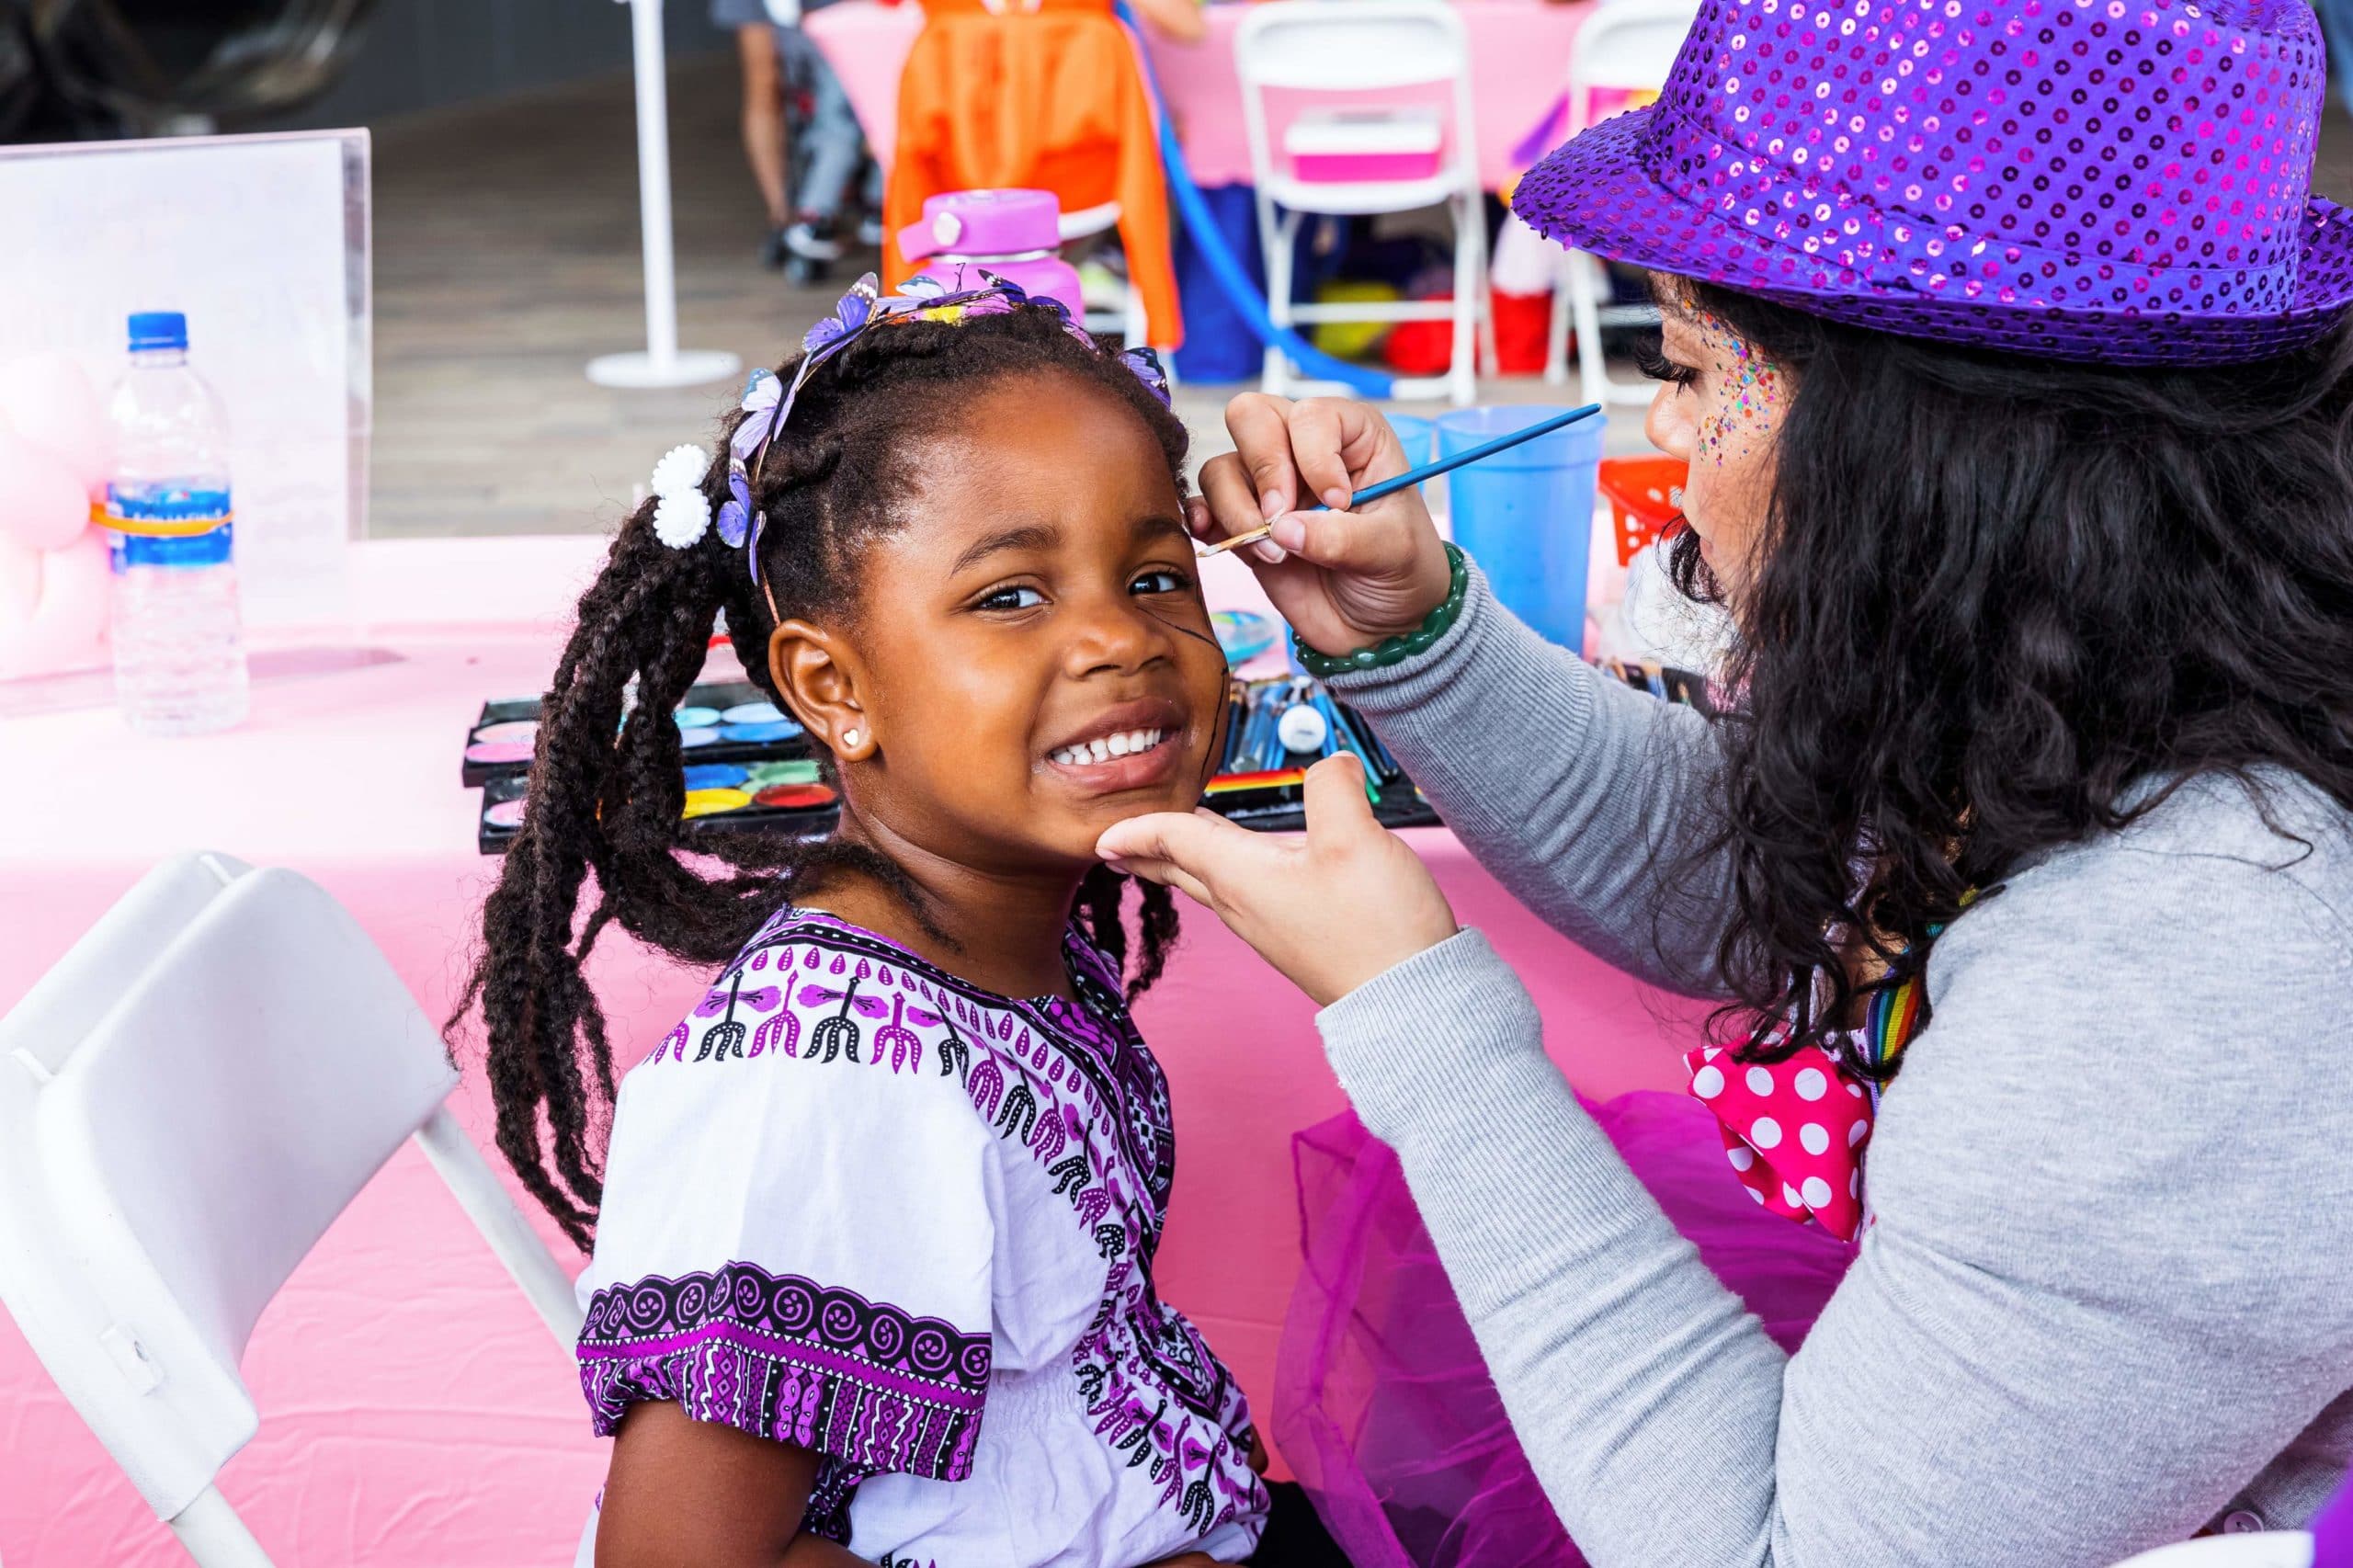 Little girl getting her face painted